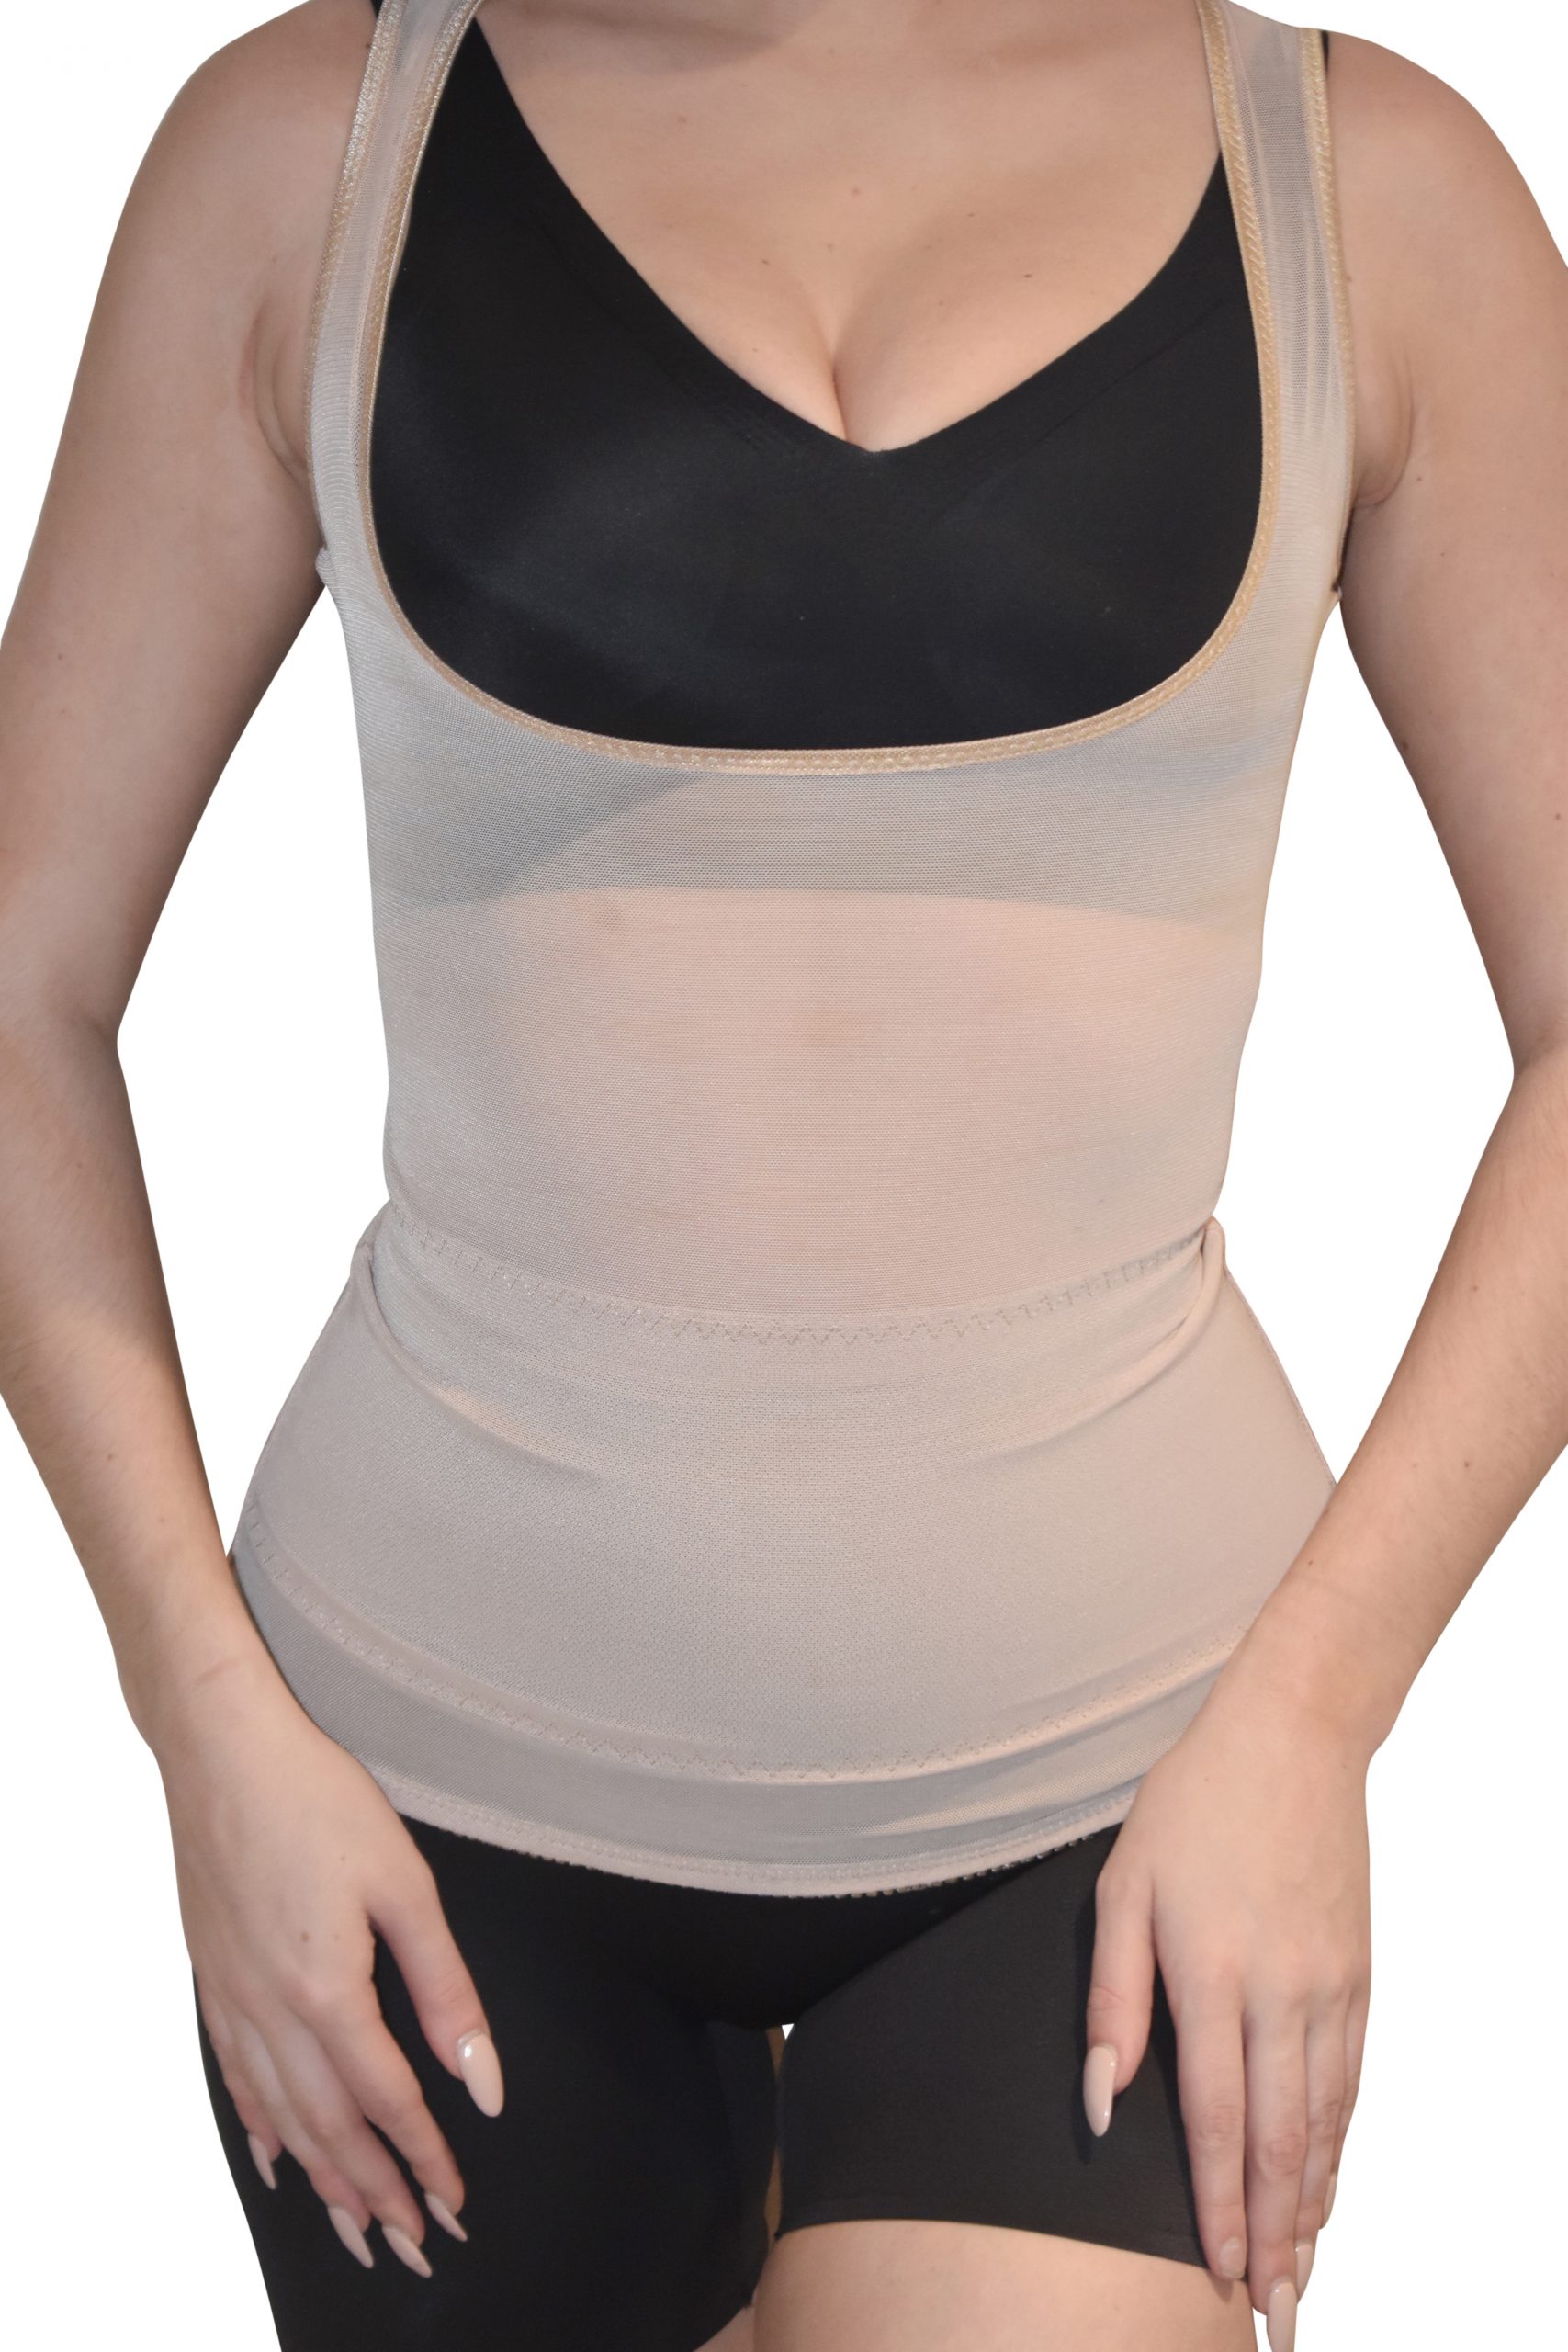 NEW Lot of 2 KYMARO Bottom Shapers Shapewear Slimmers Size M 2 Black & Nude  Size M - $27 New With Tags - From Wendy